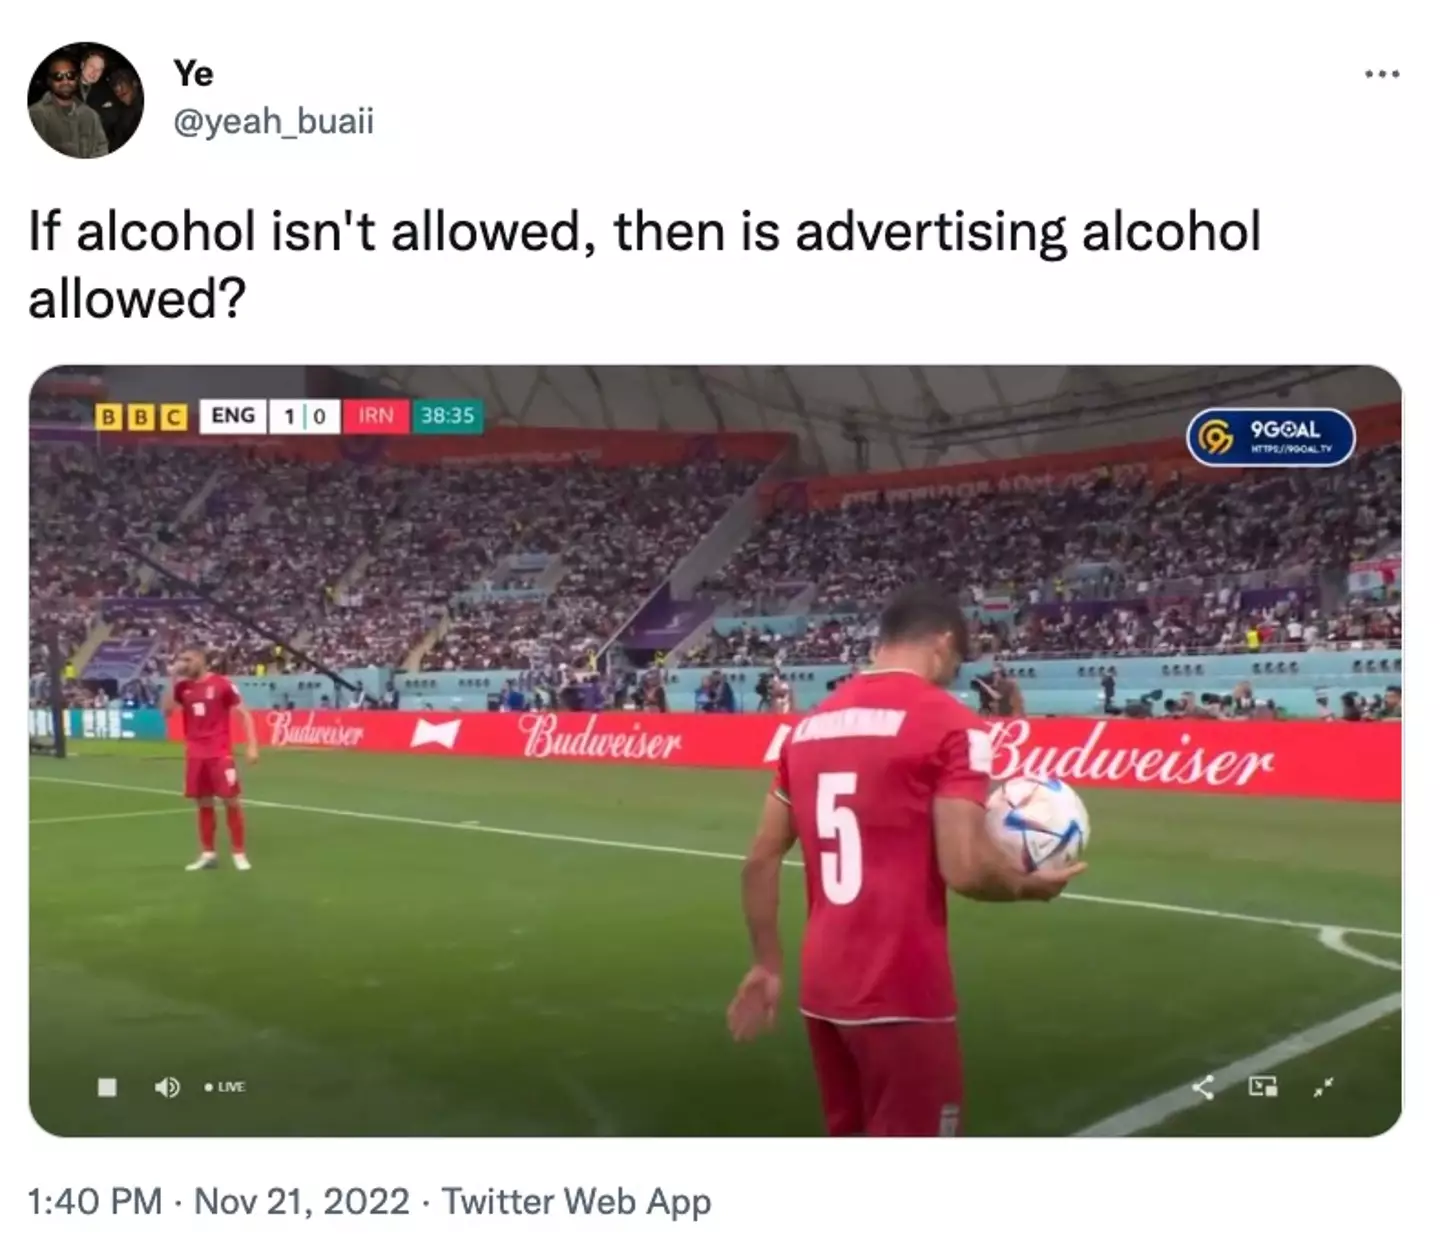 Fans have questioned why Budweiser is still being advertised in the stadium.